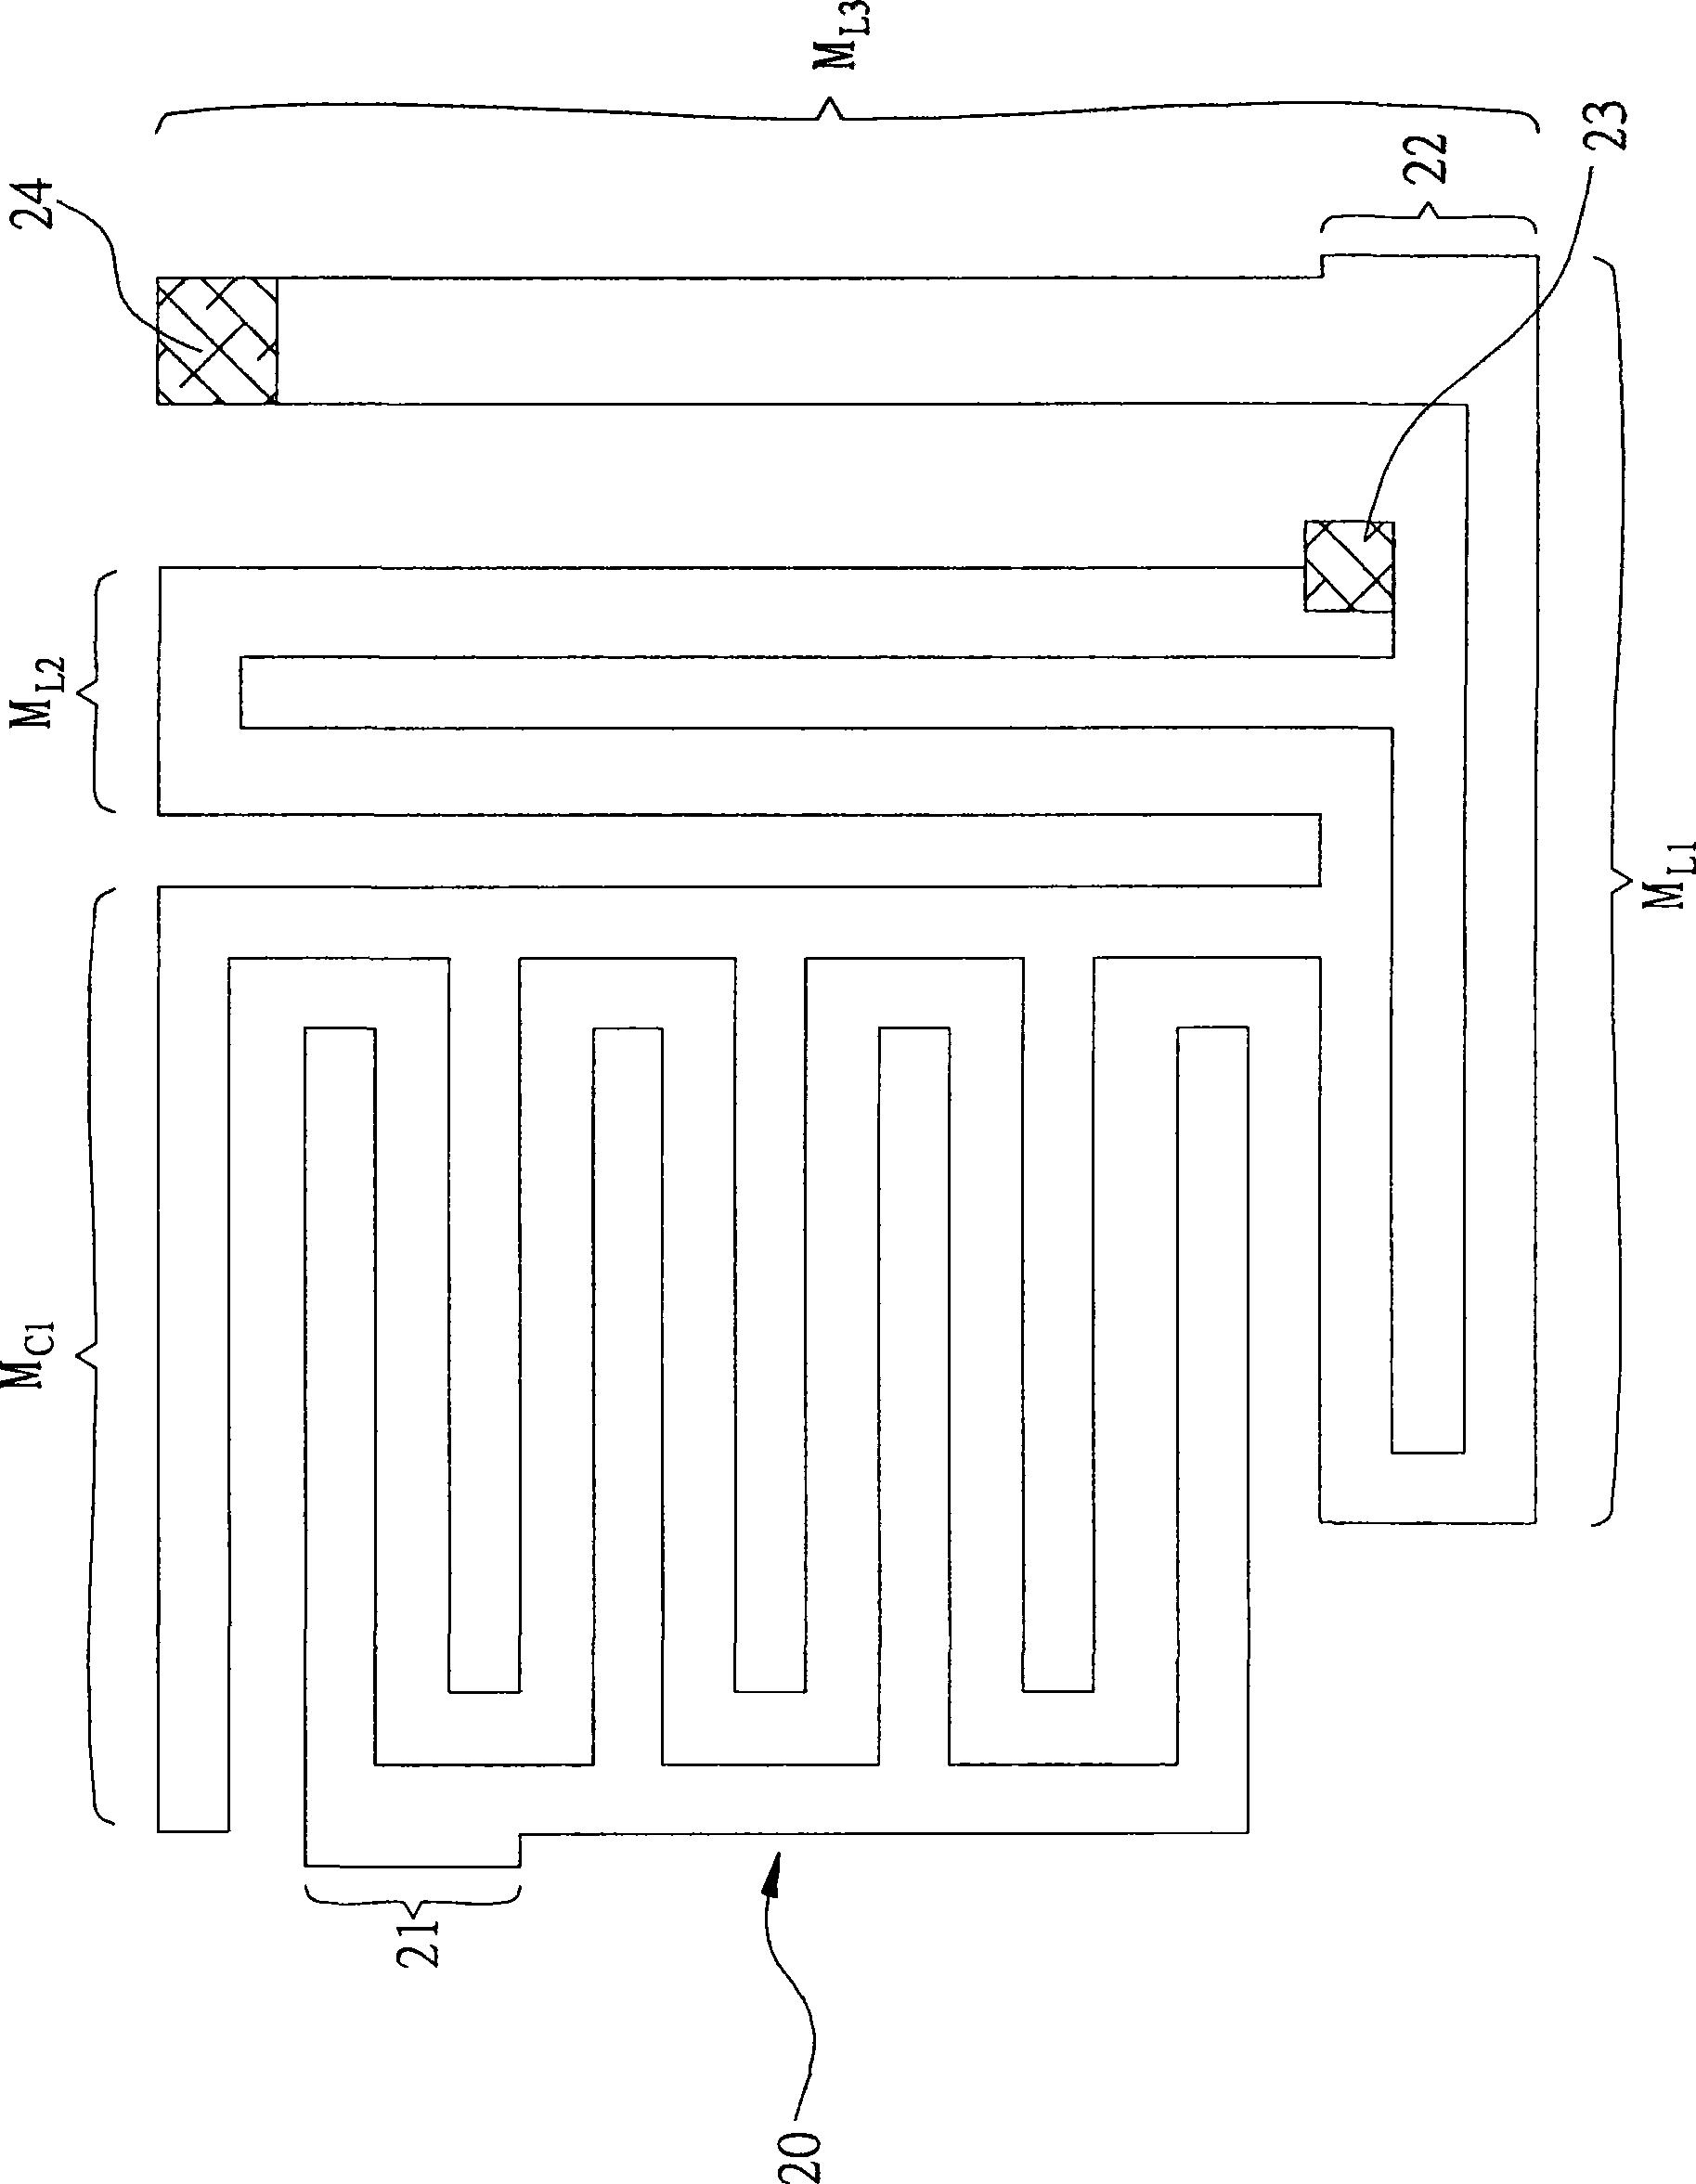 Narrow-frequency band filter on circuit board for inhibiting high-frequency harmonic wave